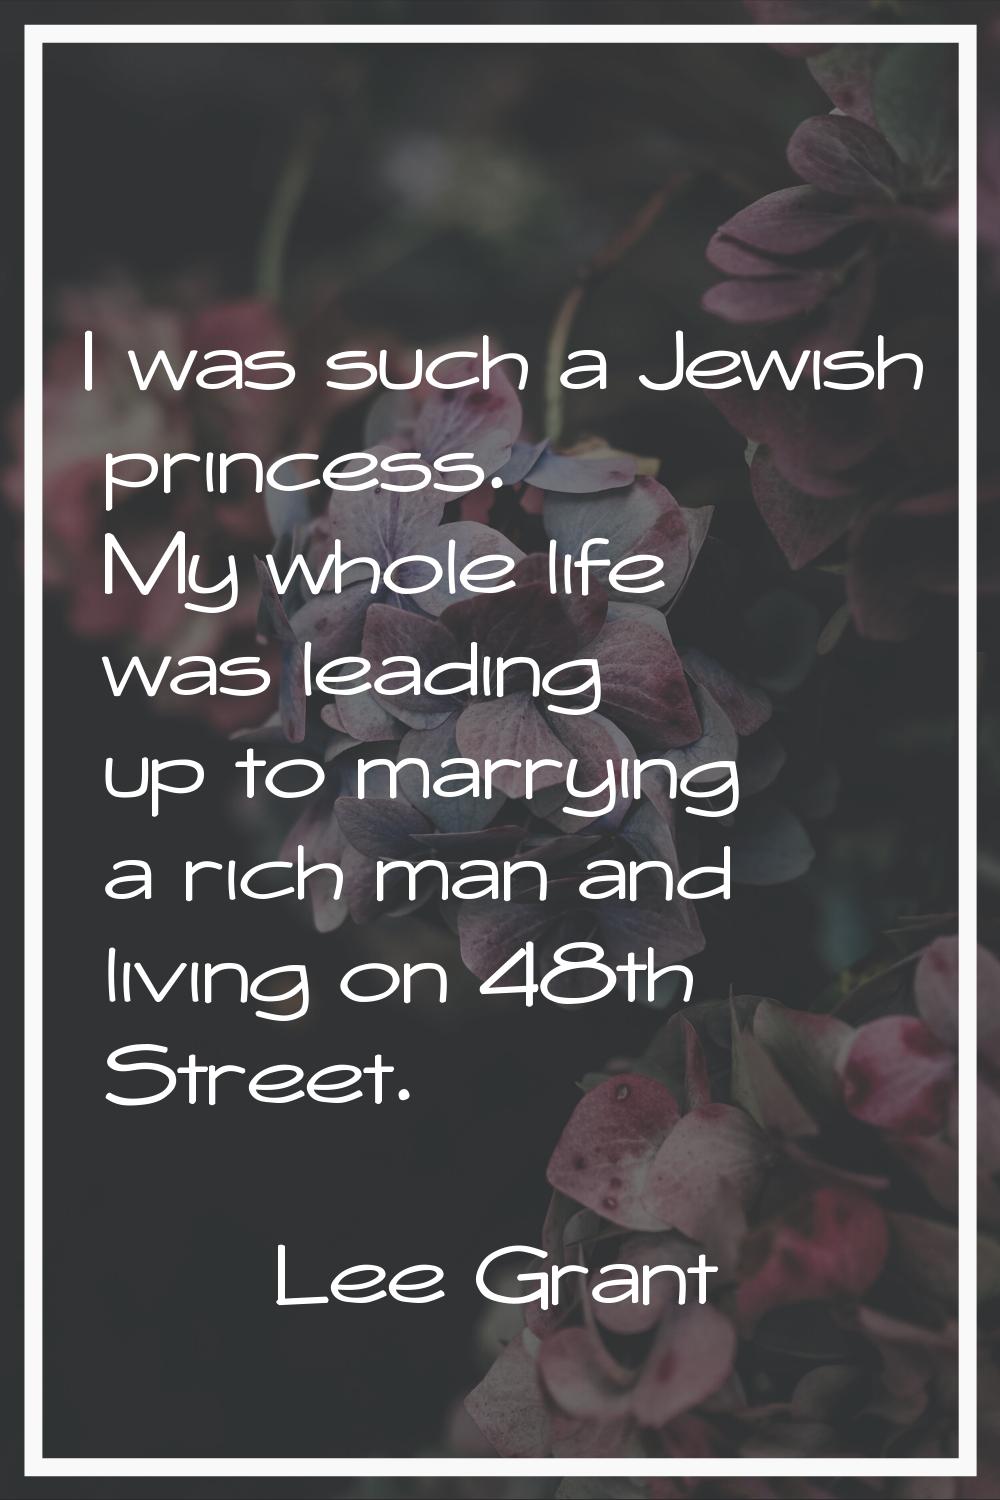 I was such a Jewish princess. My whole life was leading up to marrying a rich man and living on 48t